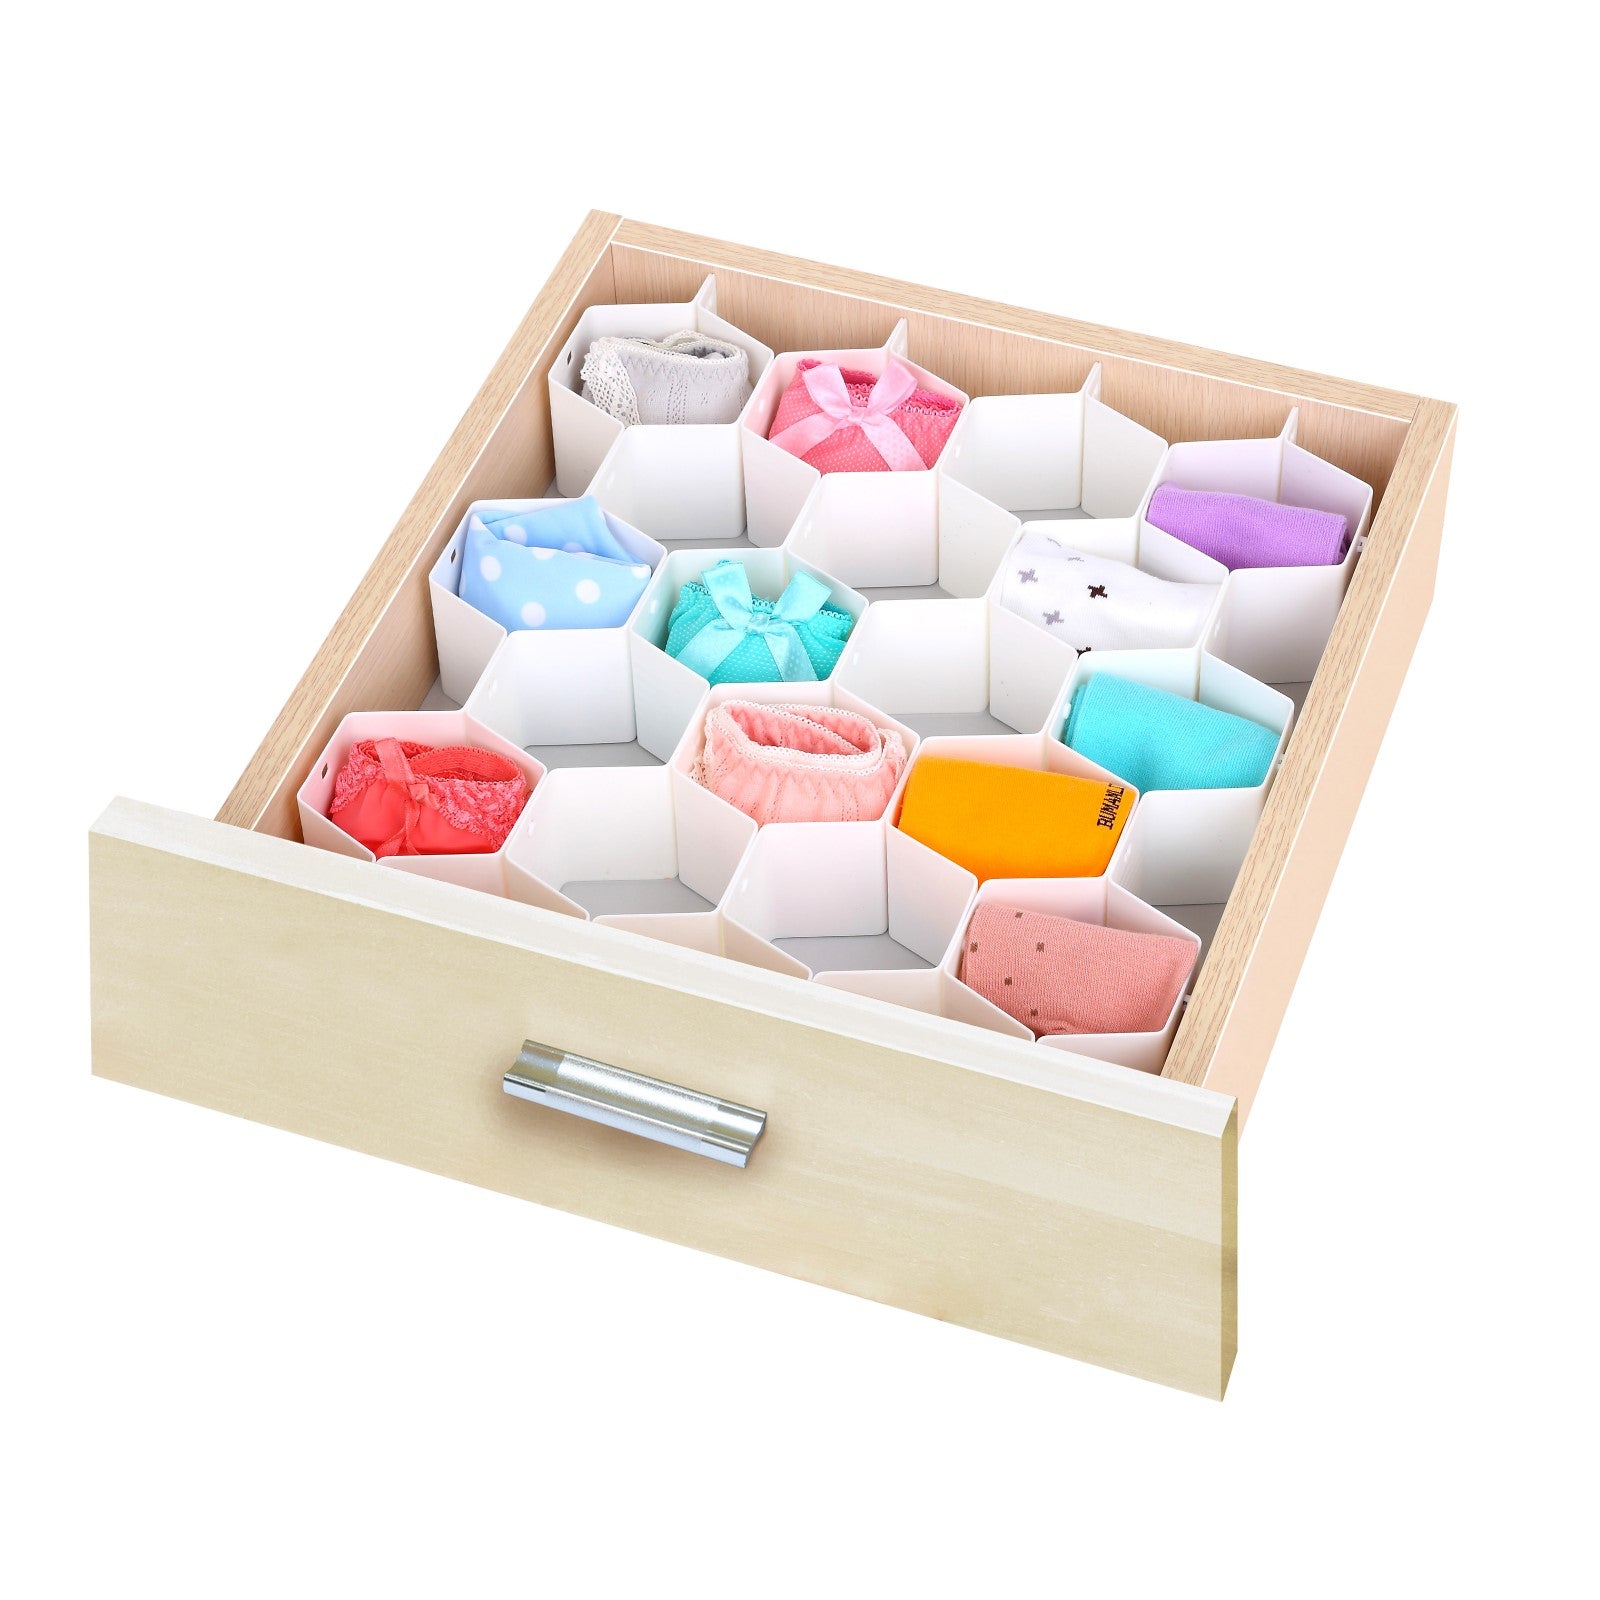 Organize Your Undies - Storing in cute compartments helps you instantly see all your undies!